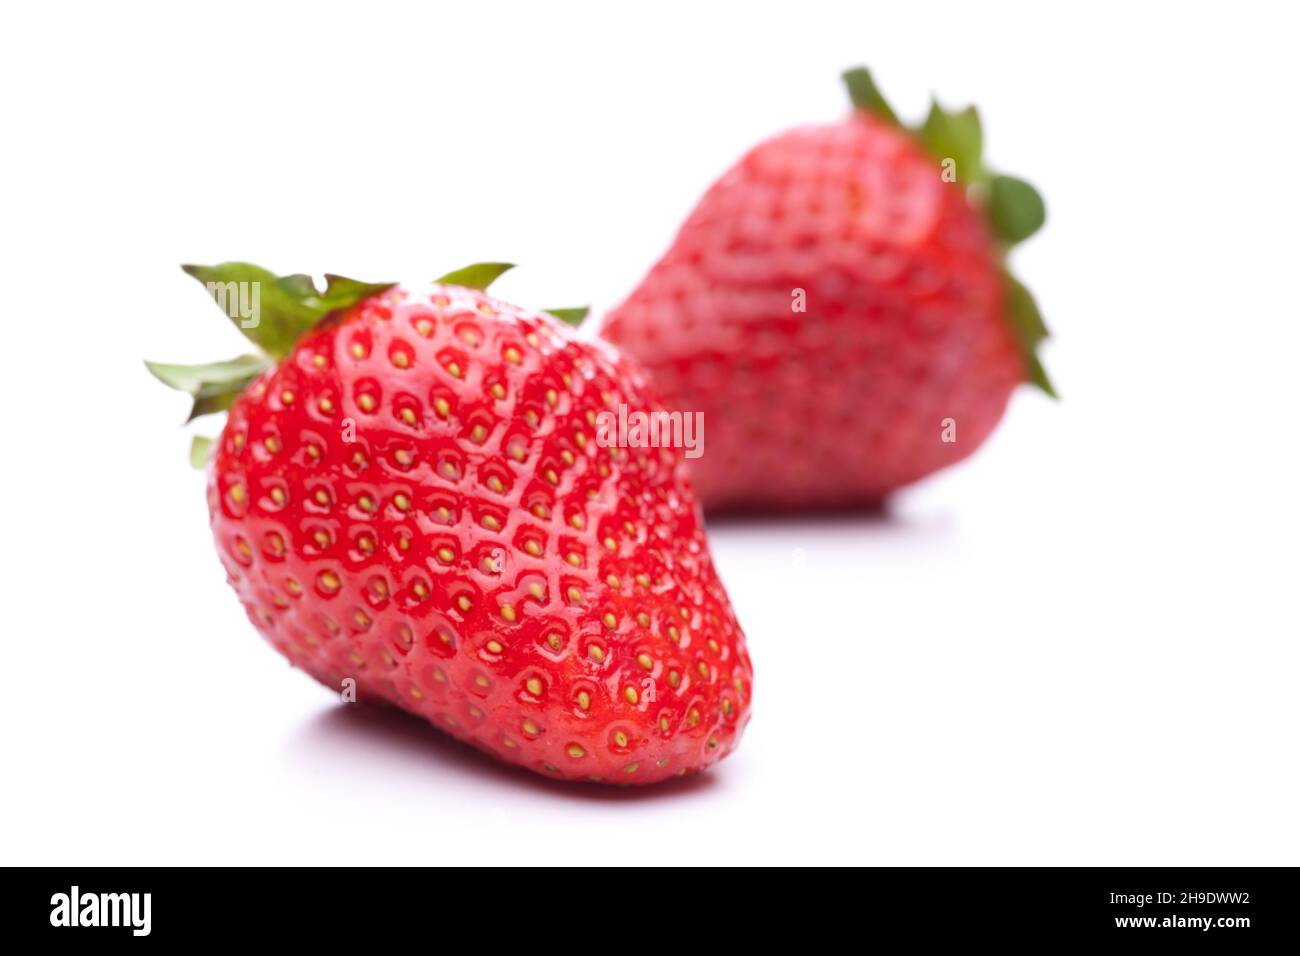 strawberry, natural, fruit, single, red, lying, one at home, table, optional, alone, studio shot, background, horizontal, beautiful, greens, isolated, Stock Photo